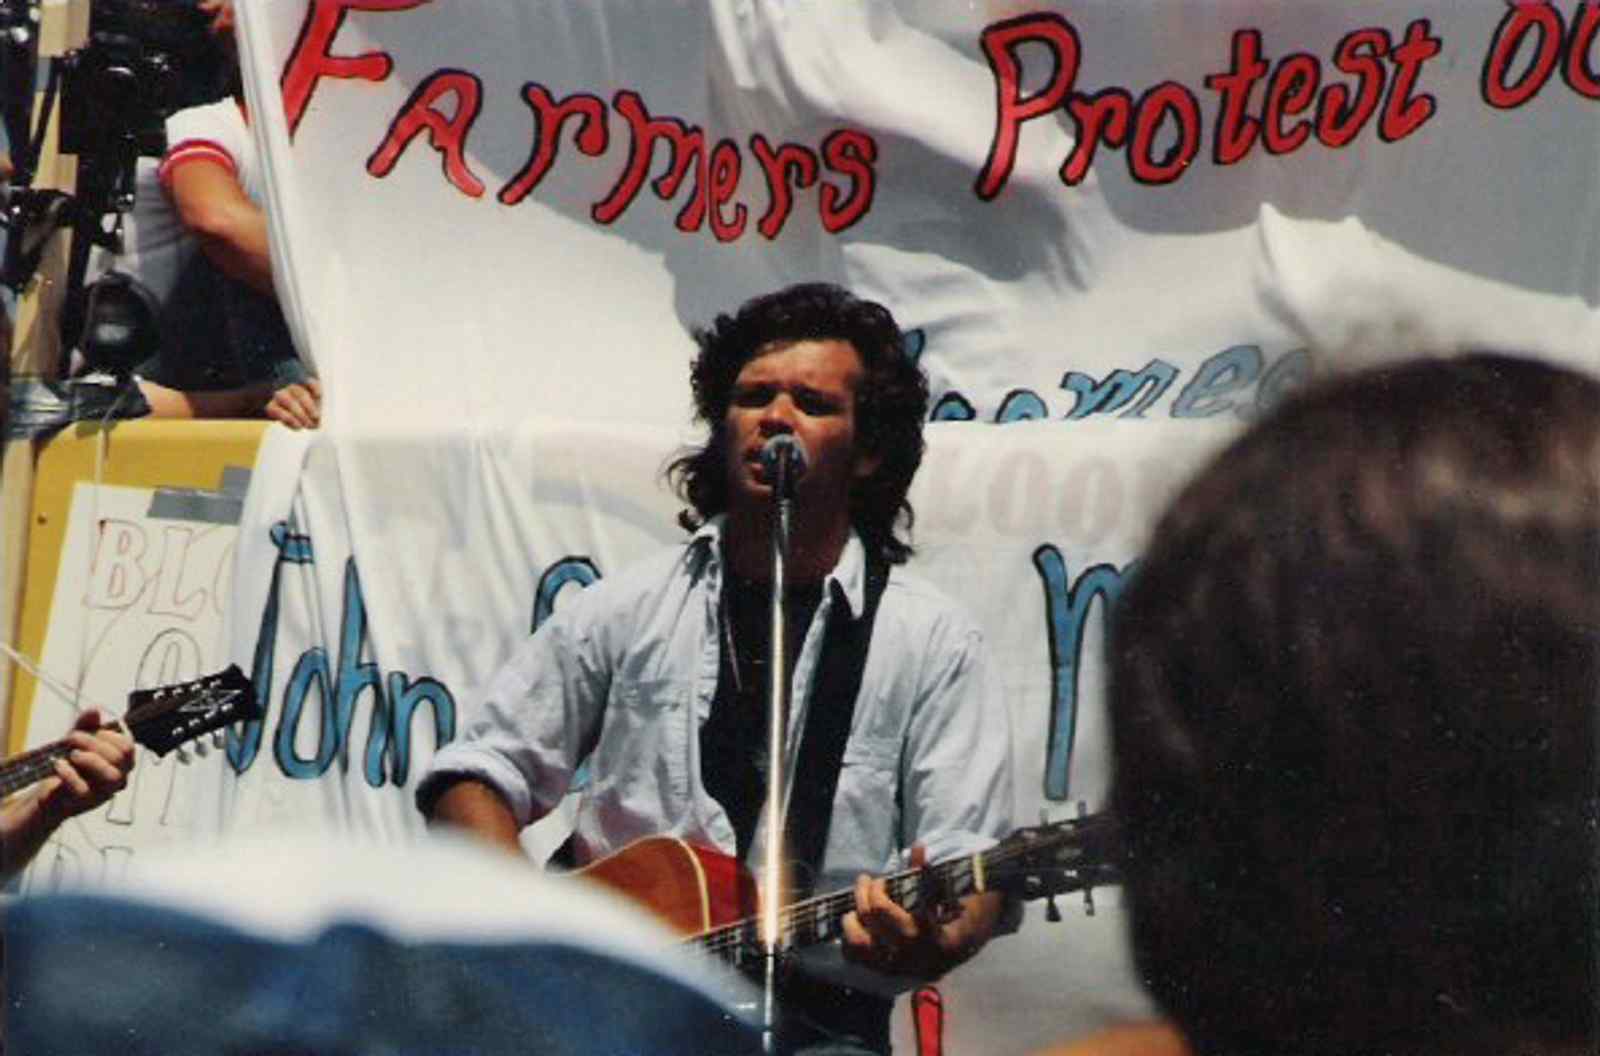 Live concert of John  Mellencamp during the Farm Crisis in Chillicothe, Missouri on May 7th, 1986.